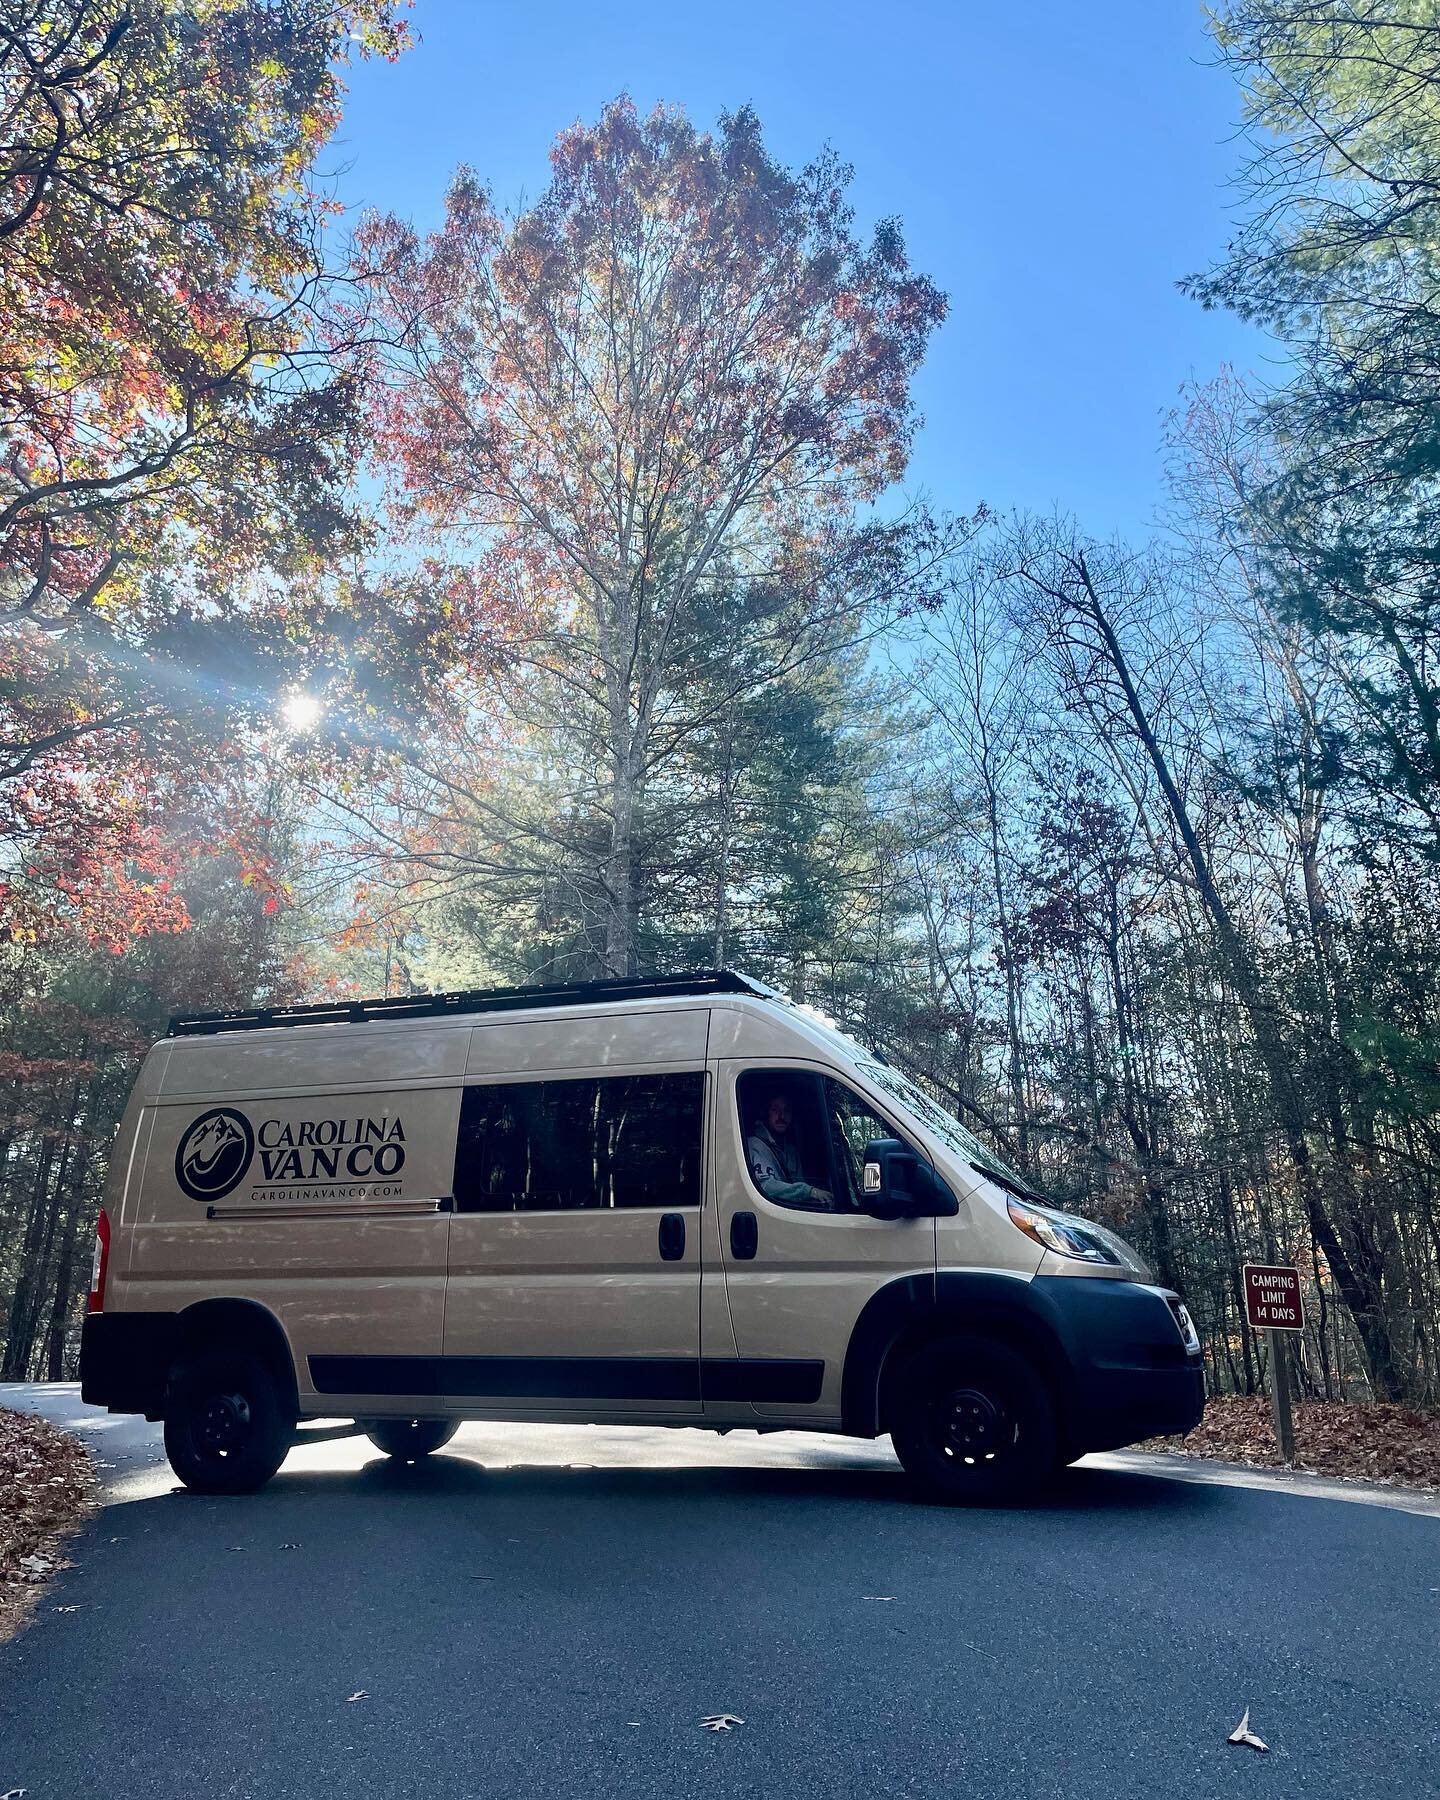 Our kind of Sunday. Wish you were exploring with us? Check out Carolina Van Co!

#visitnc #vanlife #travel #adventure #charlotte #asheville